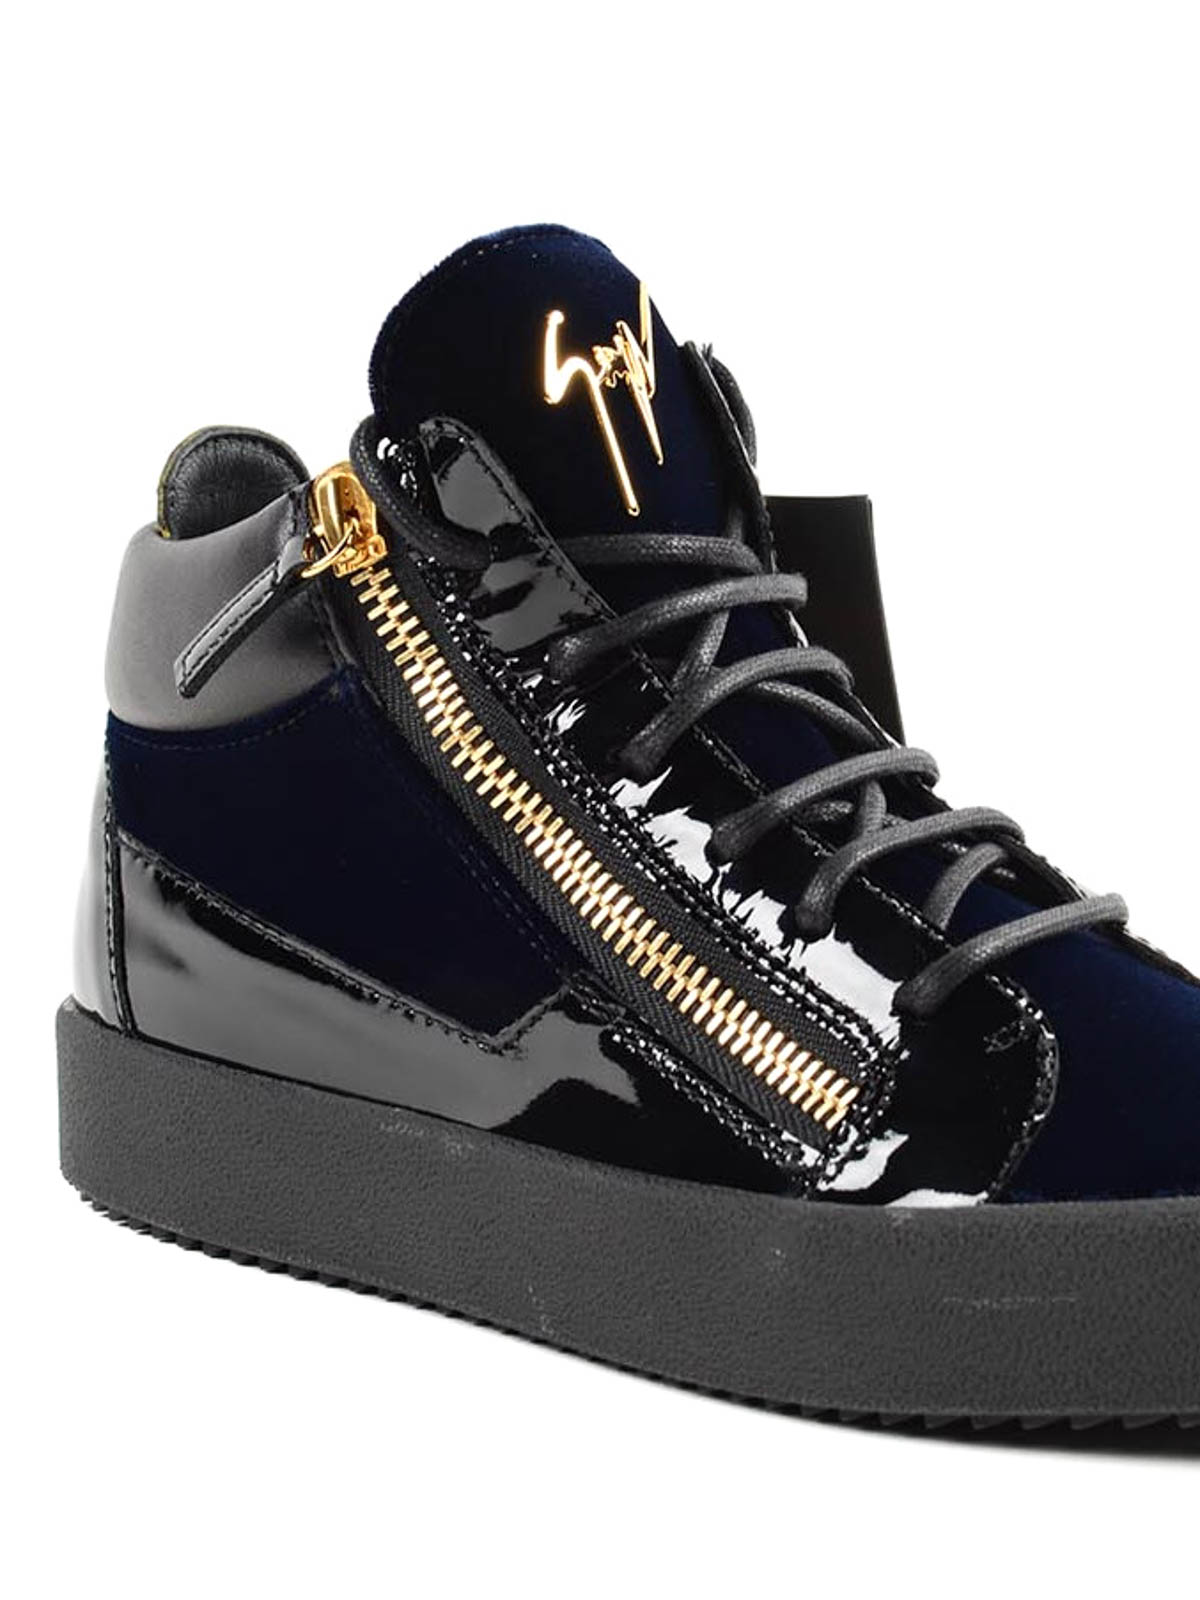 Trainers Giuseppe Zanotti - High top leather sneakers -